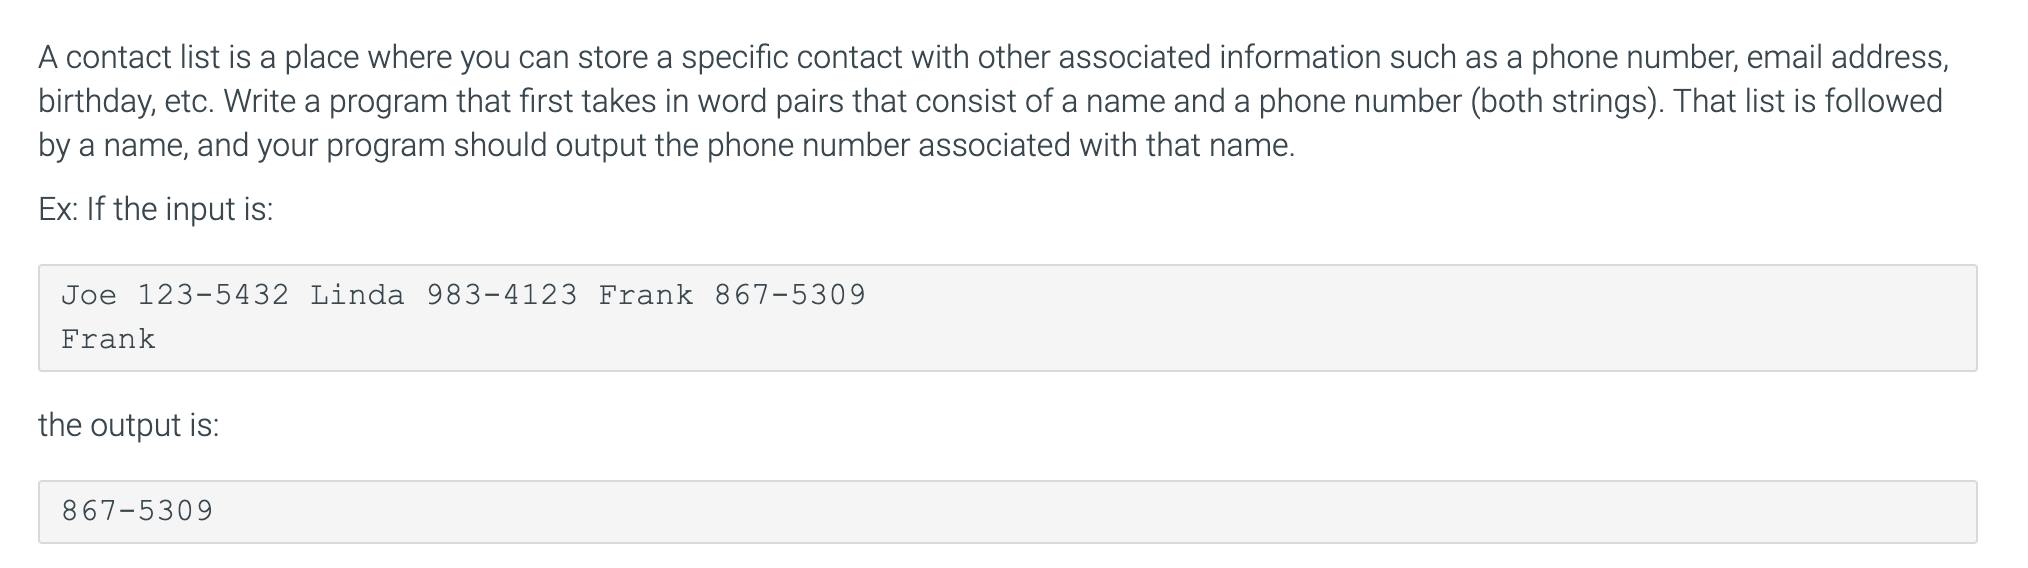 A contact list is a place where you can store a specific contact with other associated information such as a phone number, email address,
birthday, etc. Write a program that first takes in word pairs that consist of a name and a phone number (both strings). That list is followed
by a name, and your program should output the phone number associated with that name.
Ex: If the input is:
Joe 123-5432 Linda 983-4123 Frank 867-5309
Frank
the output is:
867-5309
